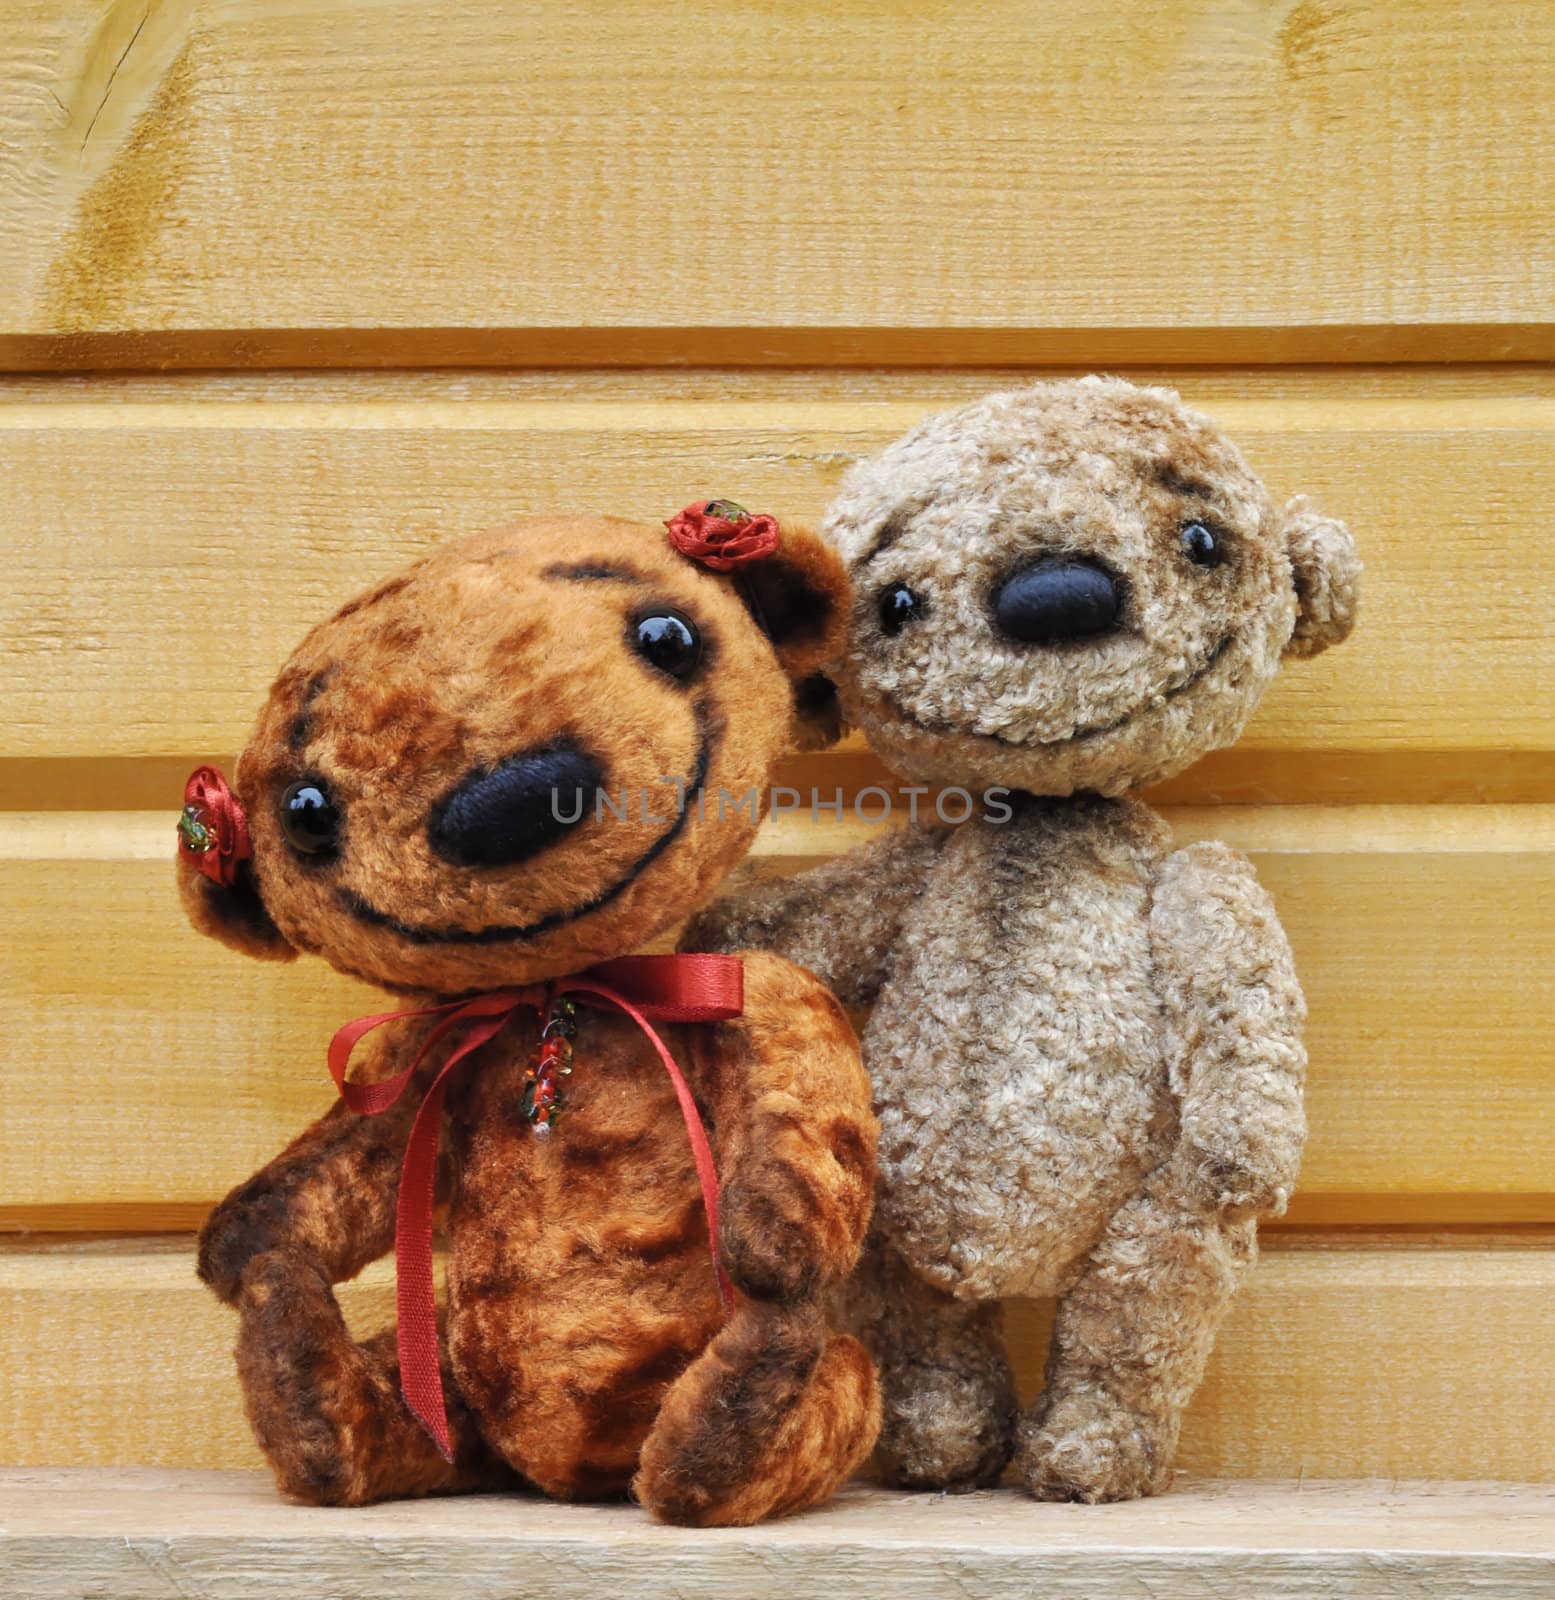 Teddy bears against a wooden wall. Handmade, the sewed plush toys